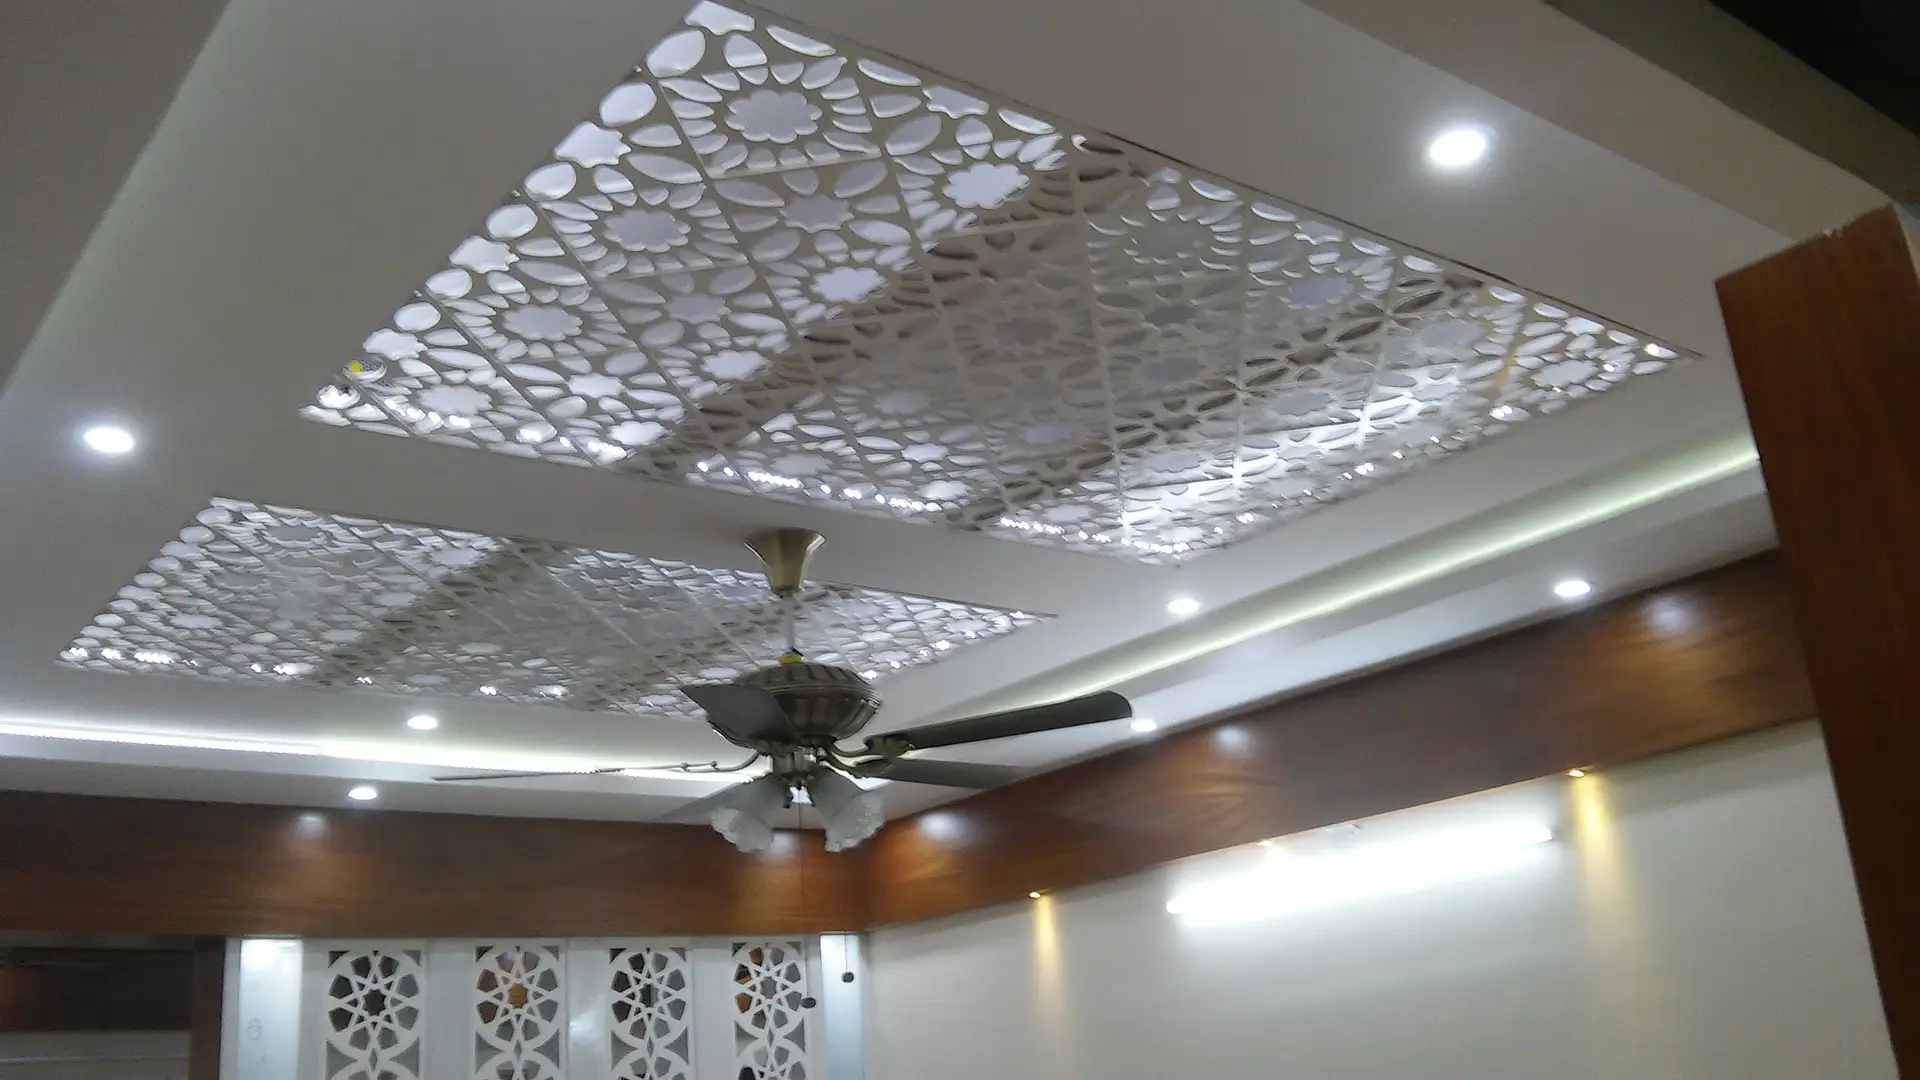  Mdf  Suspended Ceiling  Taraba Home Review